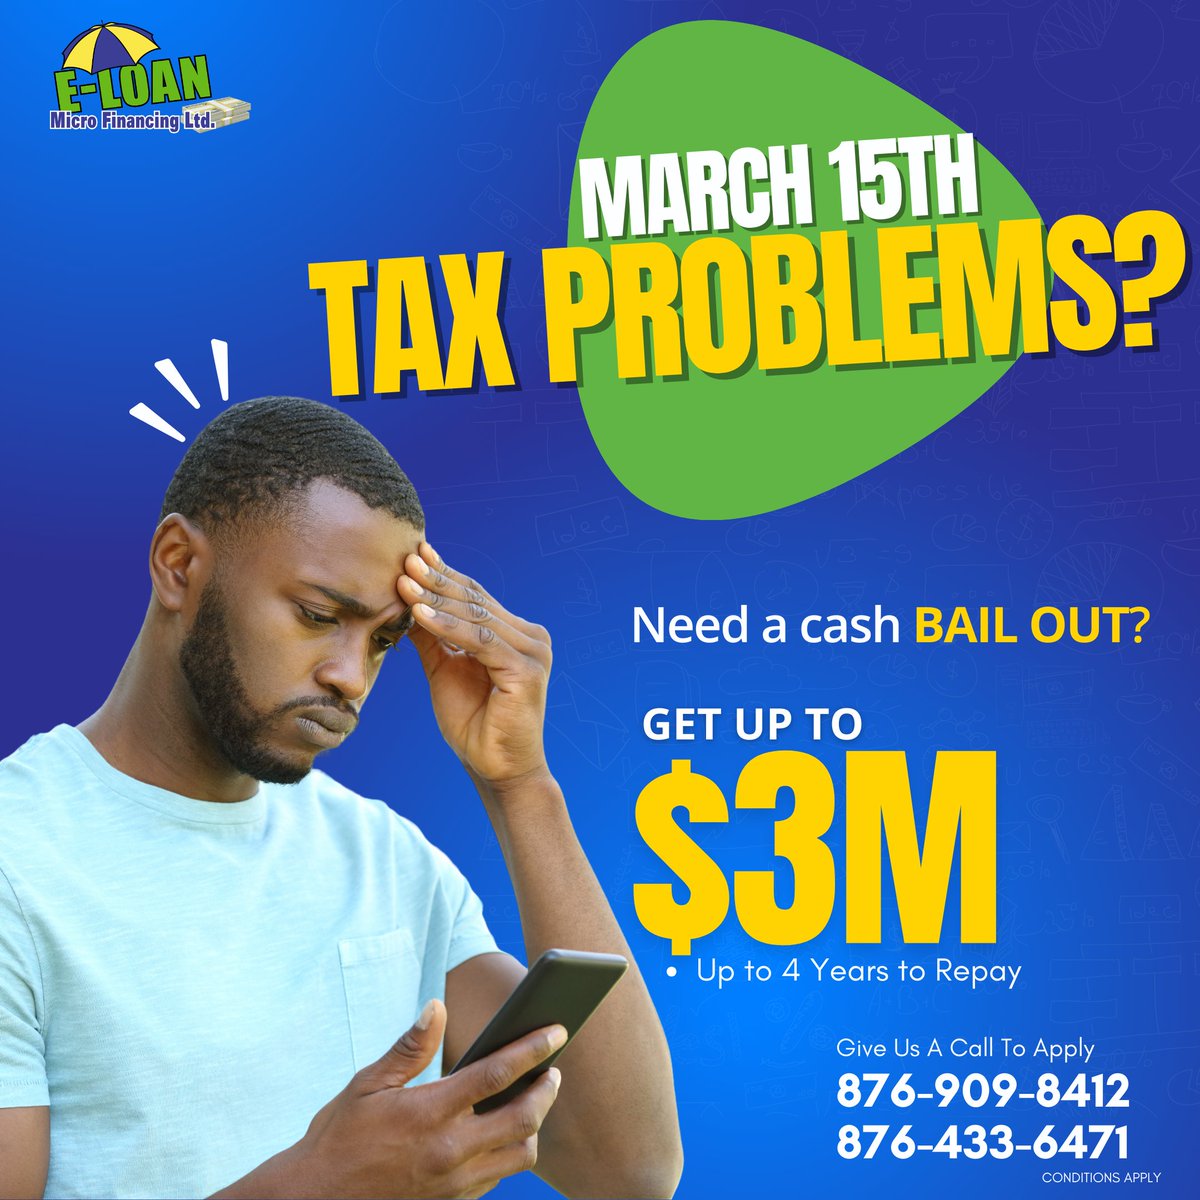 Facing tax troubles this March 15th? Don't stress! 💸 Our loan solutions can bail you out with up to $3 million. Get back on track with up to 4 years to repay. 
#TaxTroubles #LoanSolution #BestLoanCompanyInJamaica #eloan876 #Montegobayloancompany #loansinjamaica